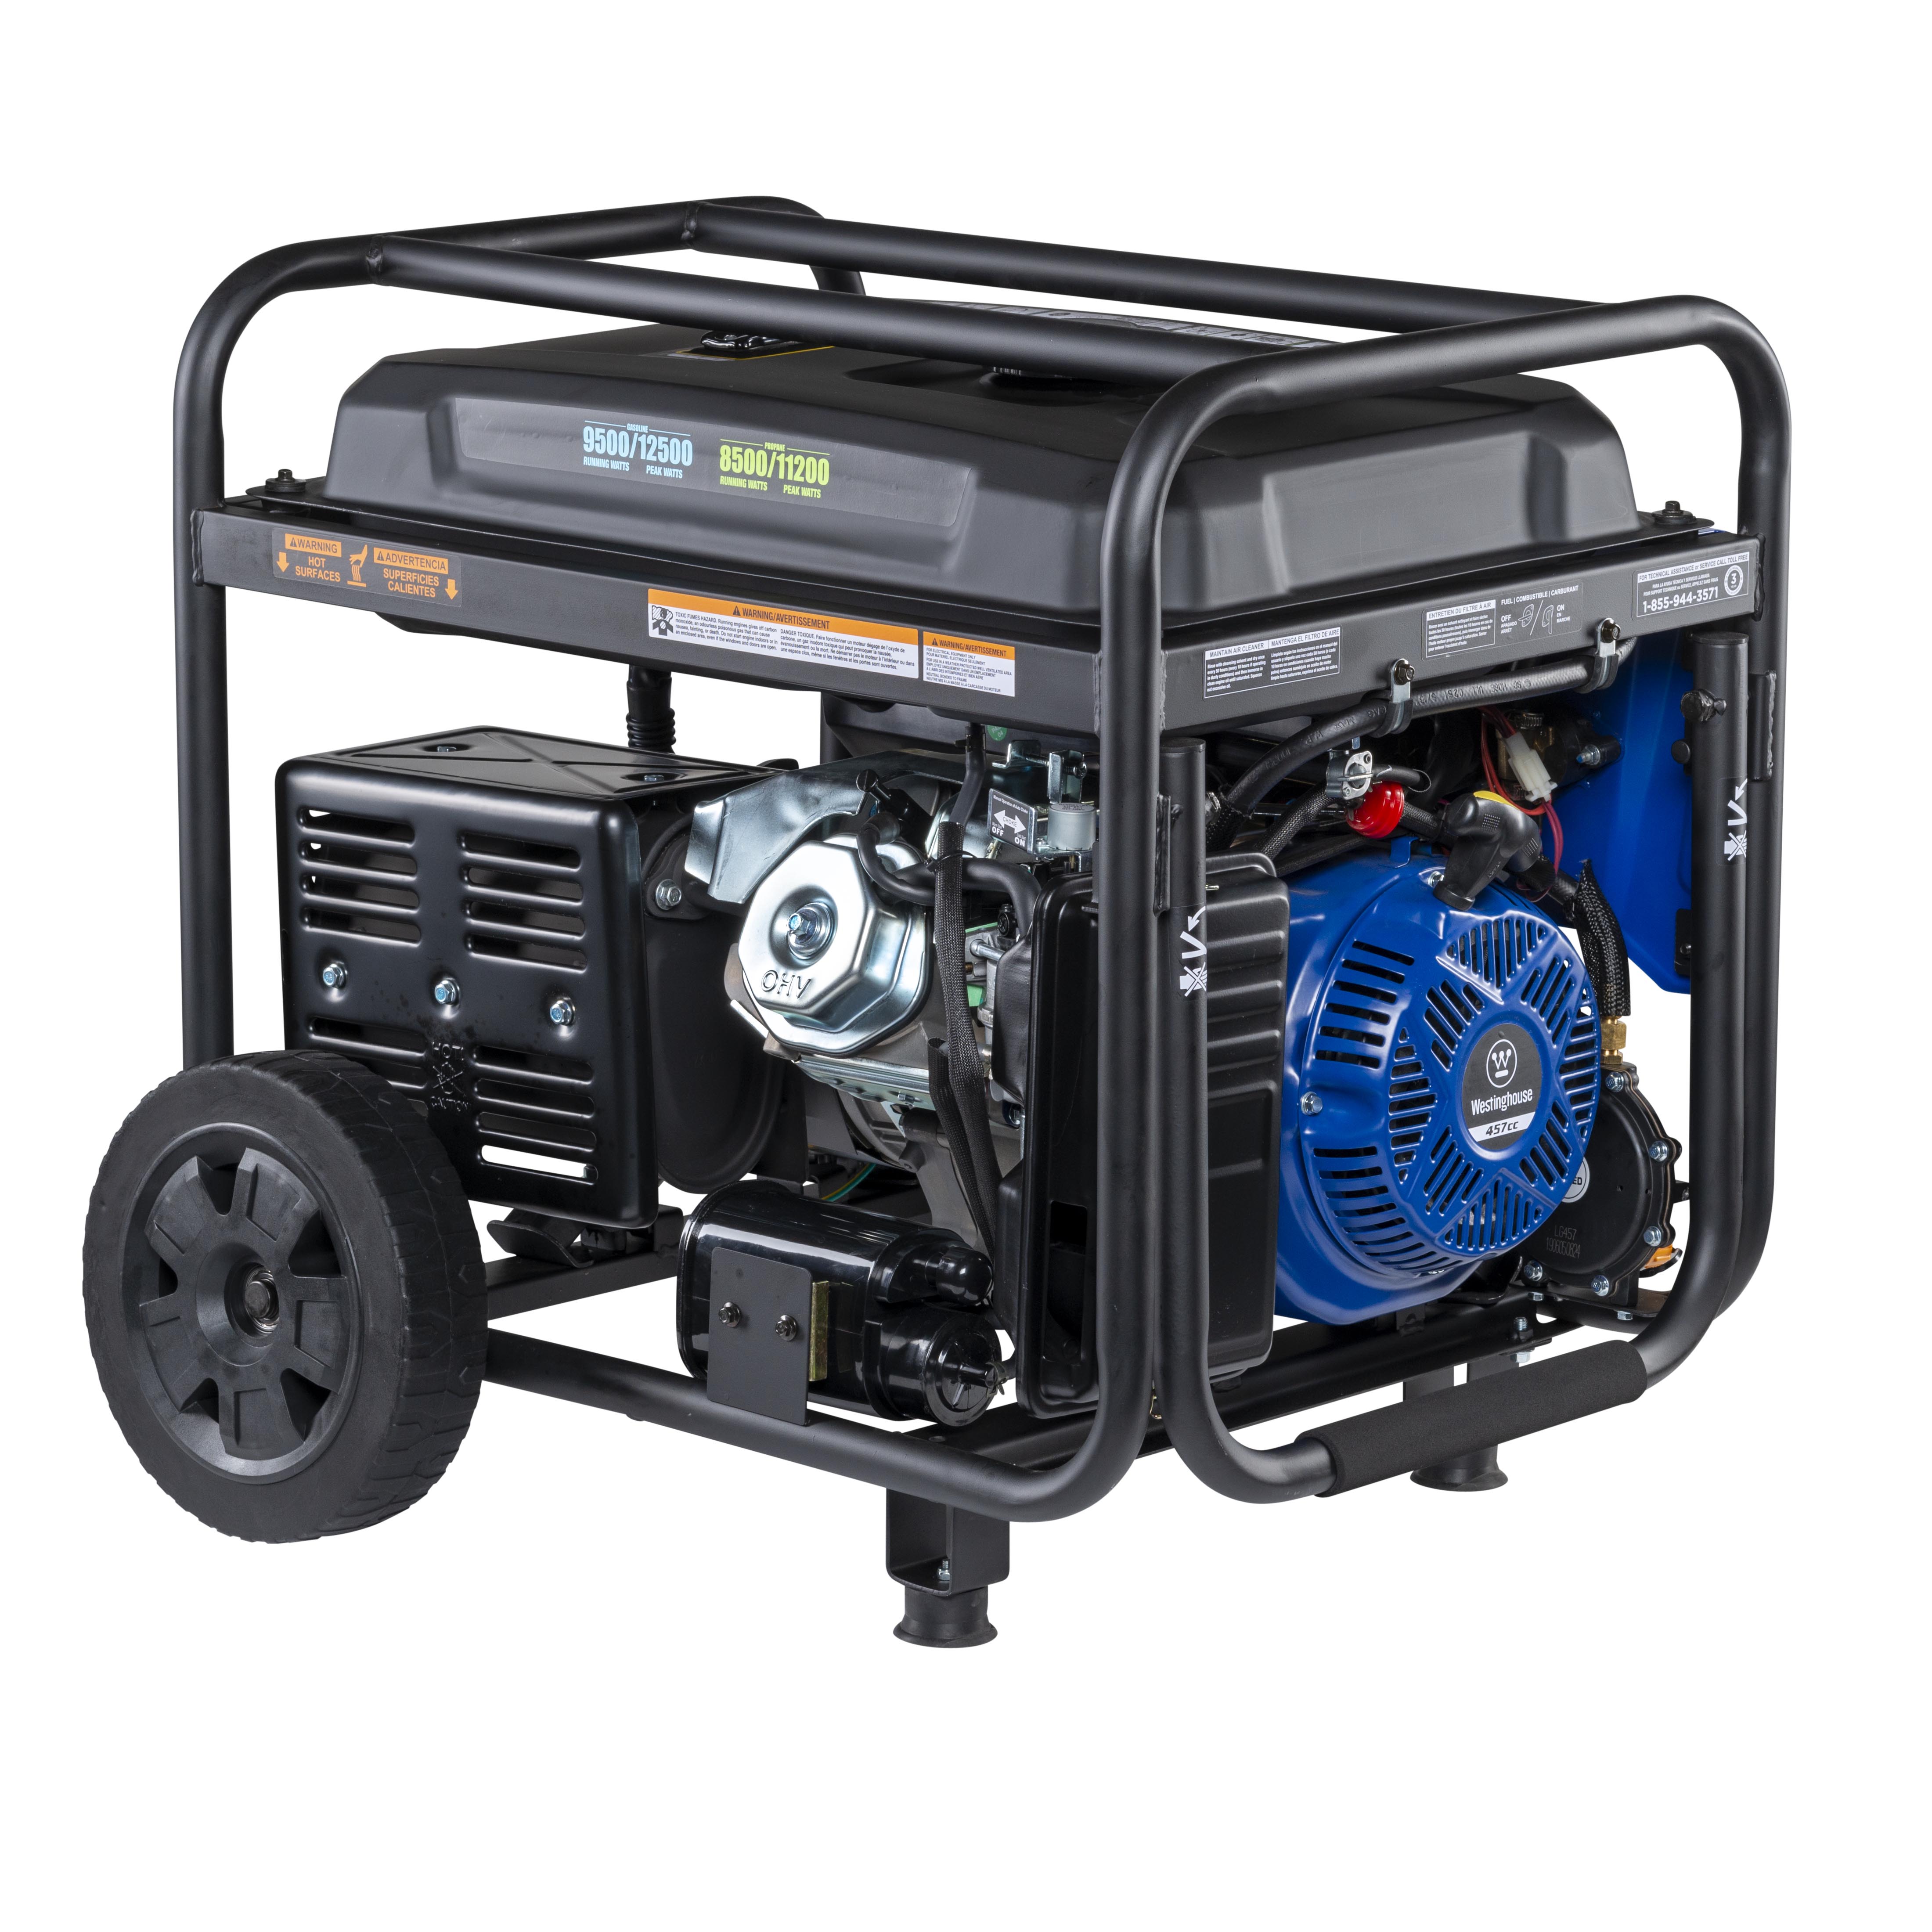 Westinghouse 12,500-Watt Dual Fuel Gas and Propane Powered Portable  Generator with Remote Start, Transfer Switch Outlet and CO Sensor  WGen9500DFc - The Home Depot